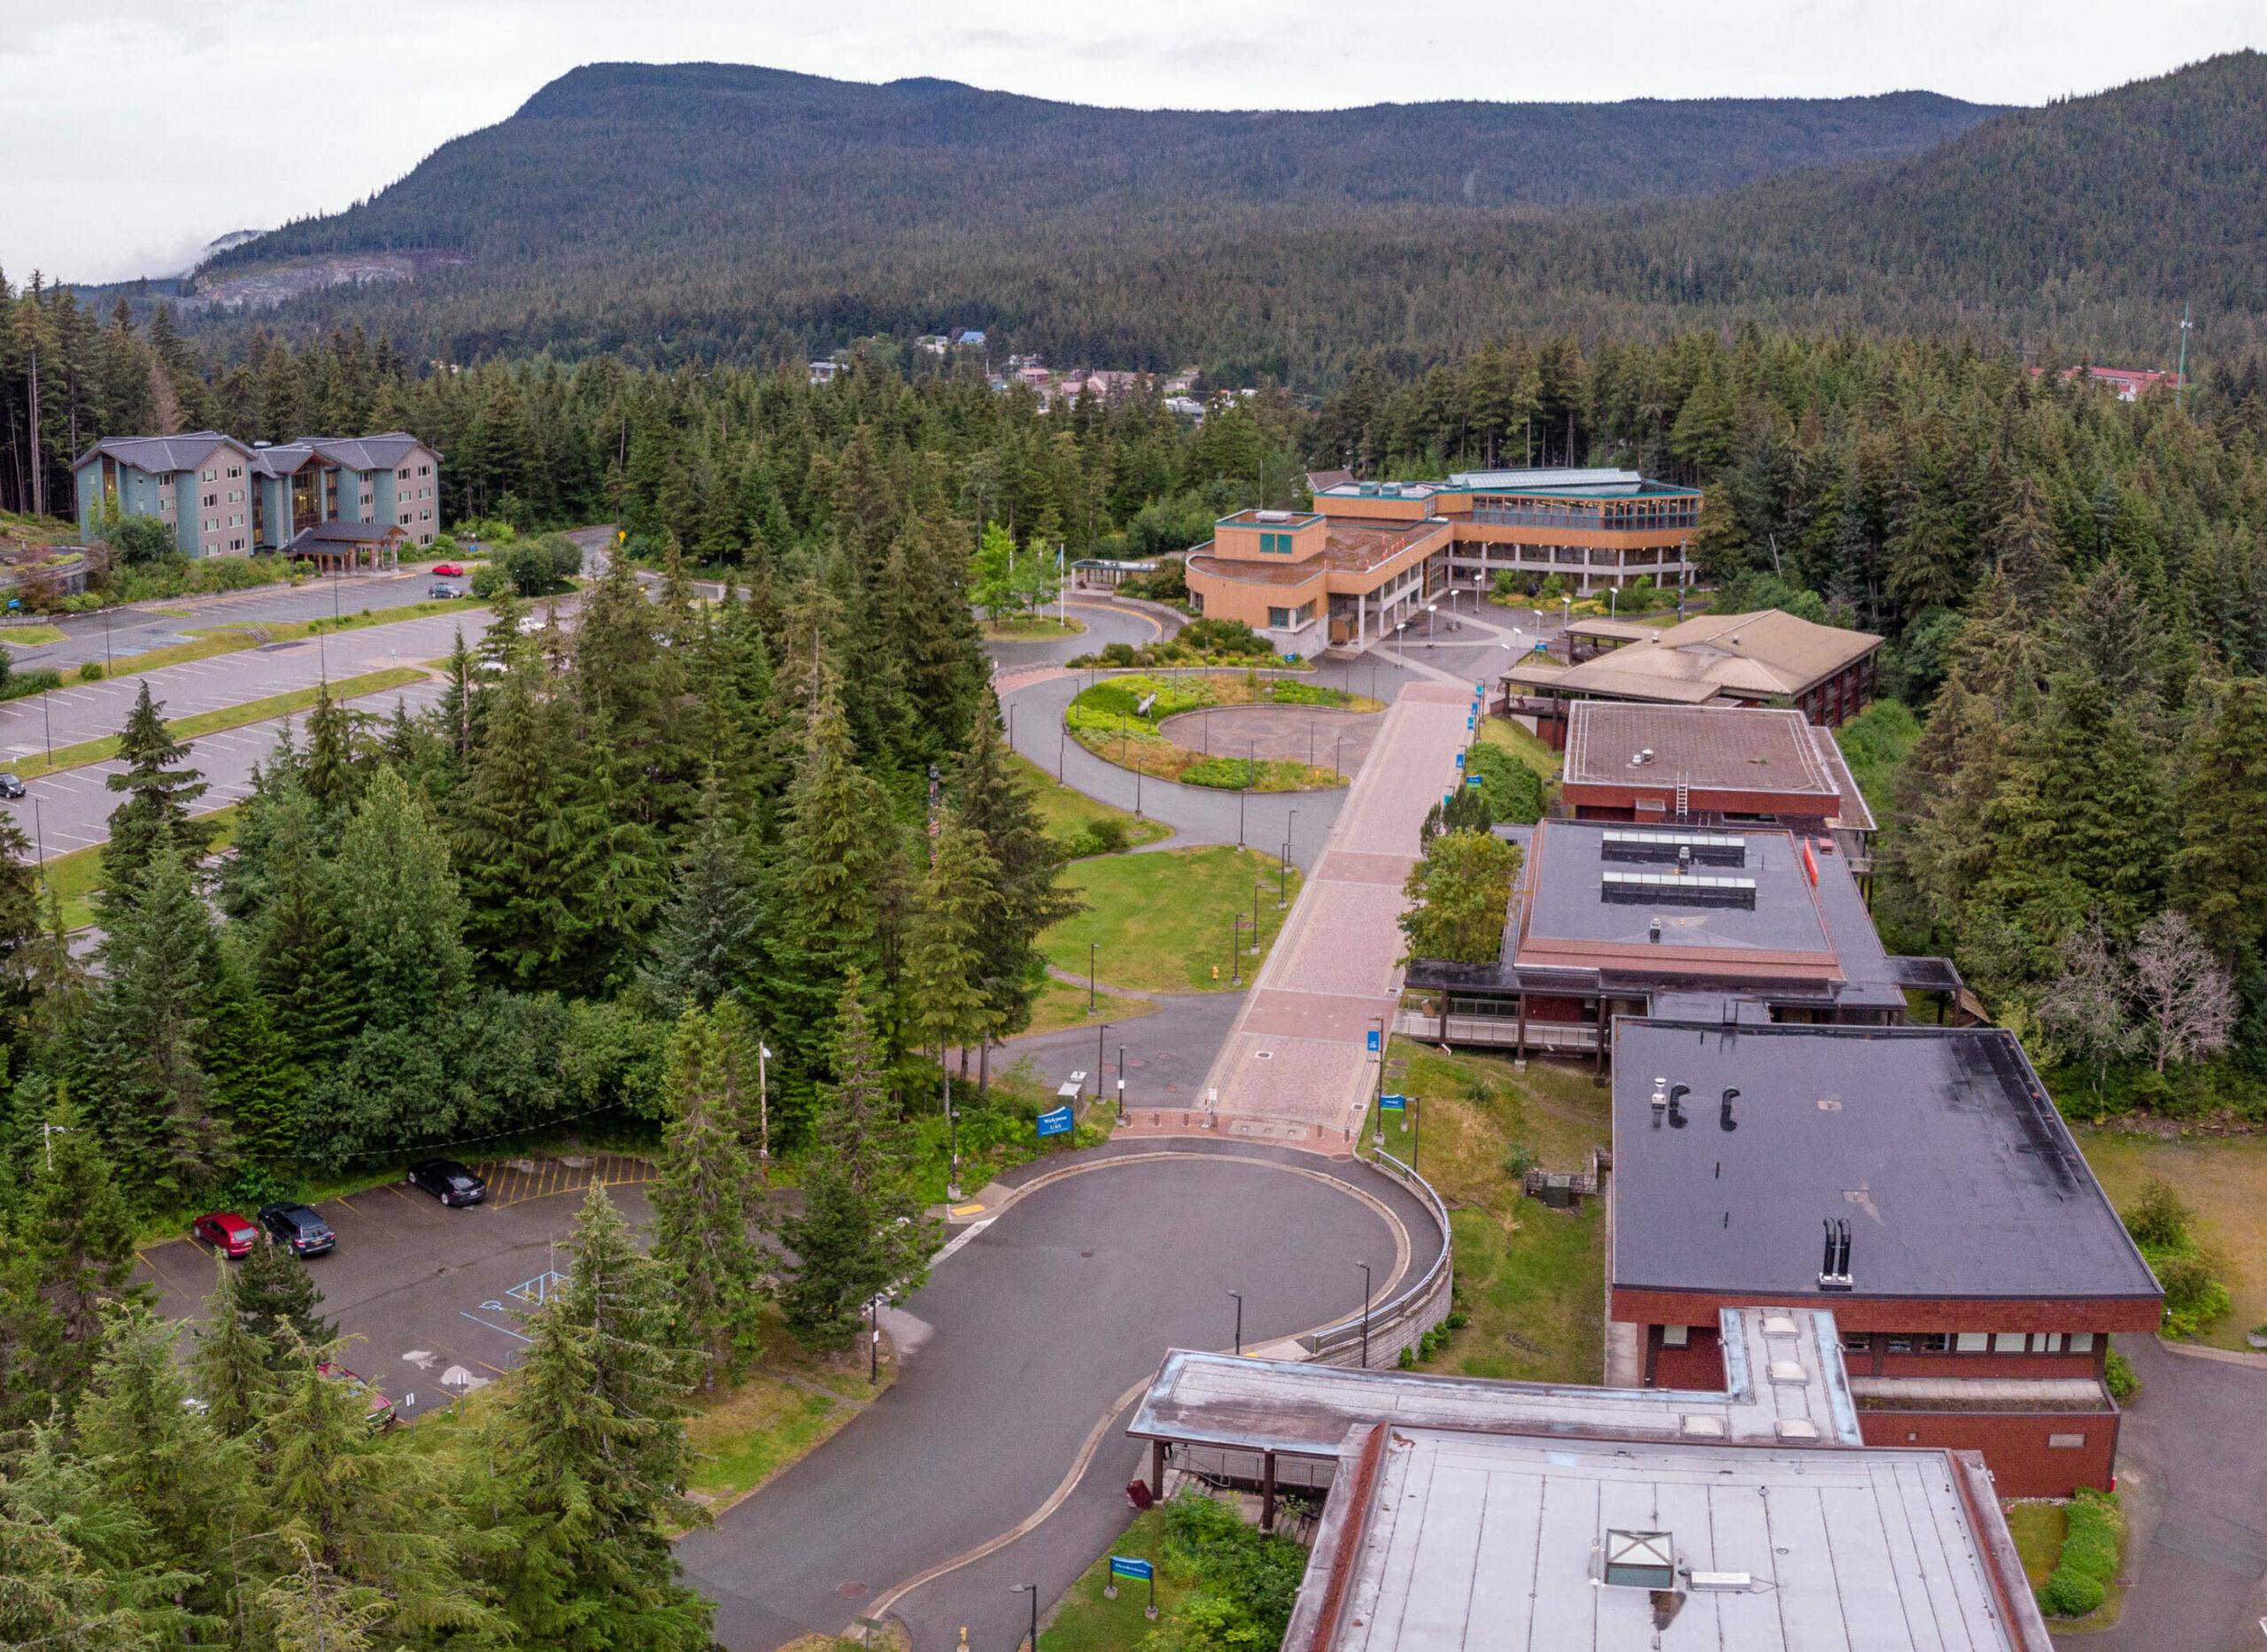 University of Alaska regents approve faculty pay increases. But the union says negotiations aren’t over. – Alaska Public Media